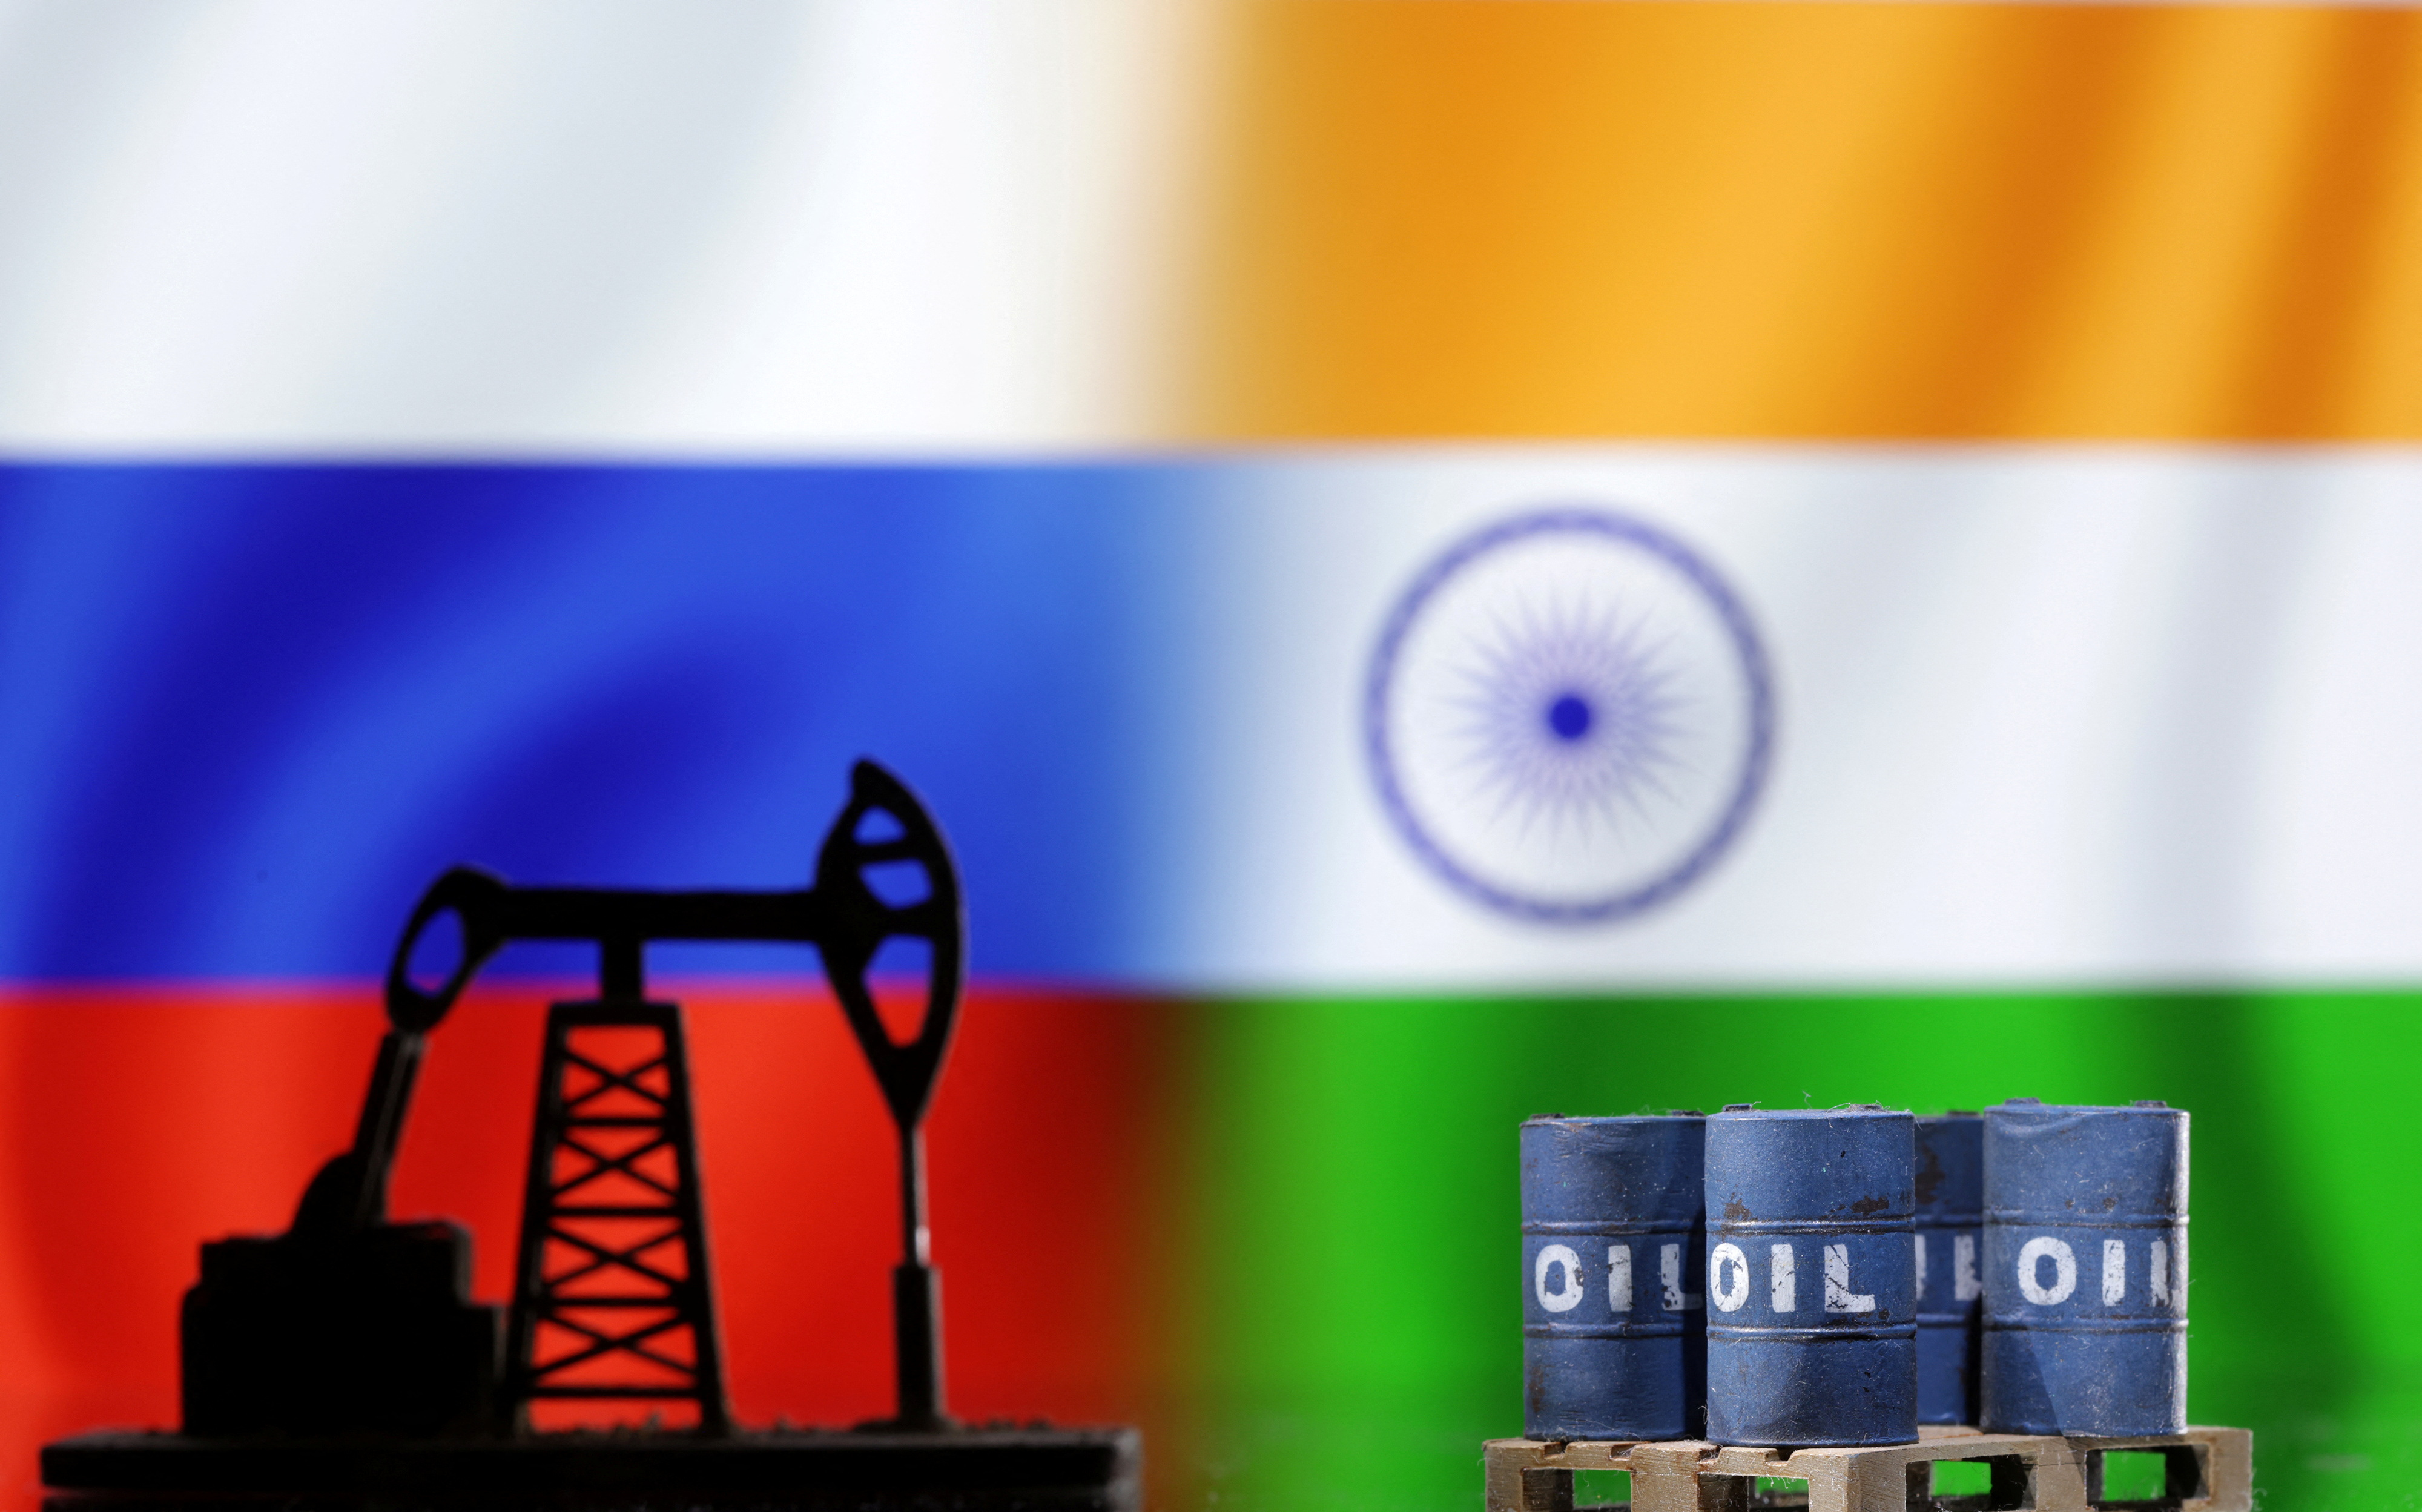 India, Russian Oil And The Story Of The “Hypocritic Country” Europe.